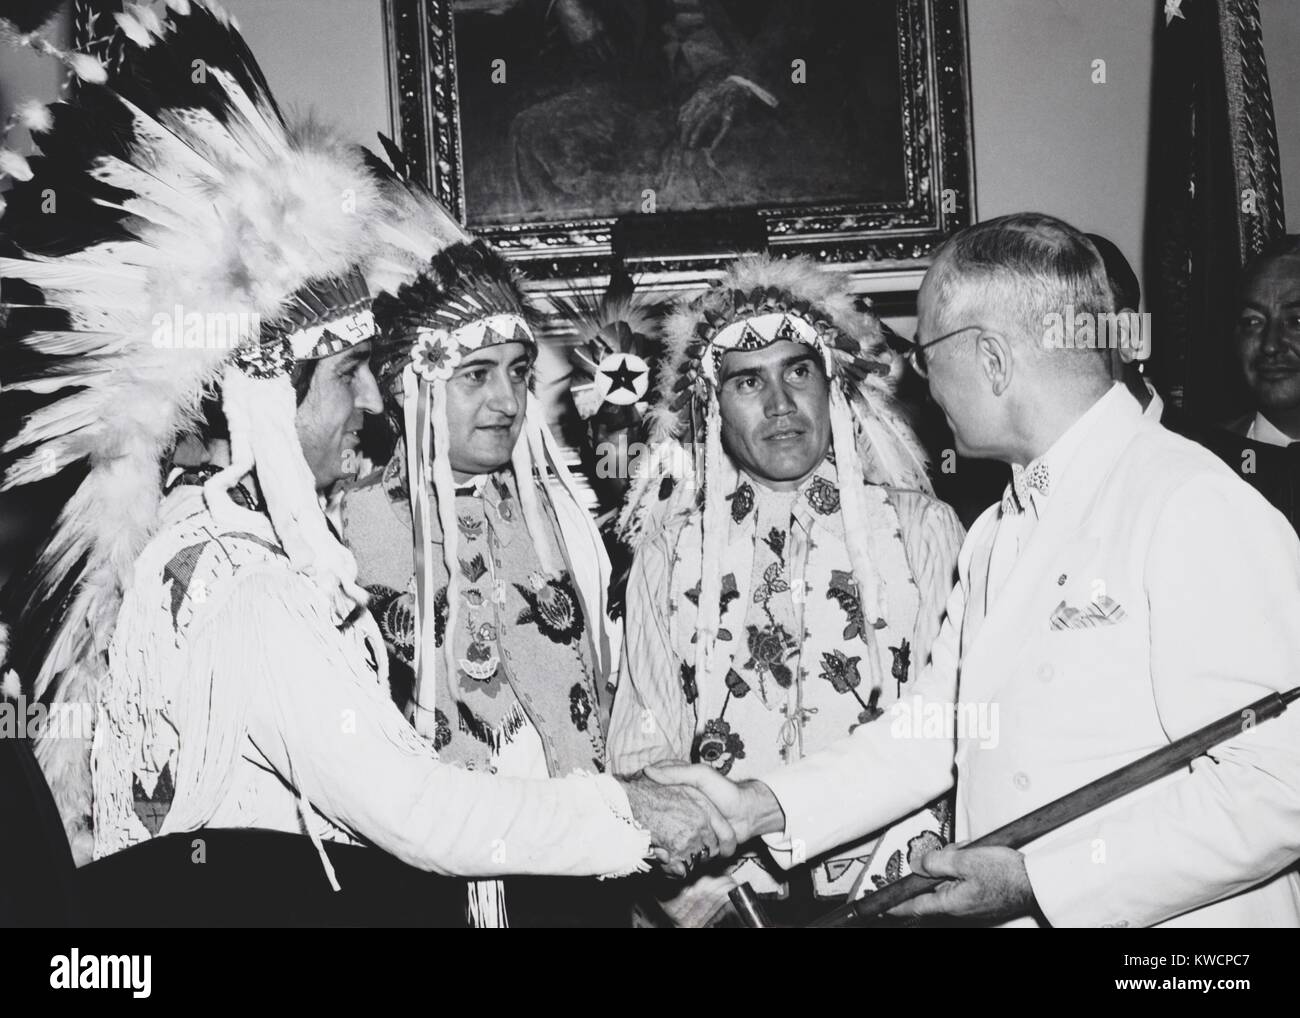 President Truman was presented a pipe said to have once been smoked by Sitting Bull. He had just signed the Indian Claims Commission Act. Aug. 13, 1946. The purpose of the Act was to settle every claim Indian tribes could possibly have against the U.S. within five years of it's passage. L-R: Ish-Ti-Opi, (Choctaw), Caddo, OK; Reginald Curpy, (Uncompahgre Ute), Ft. Duchesne, UT; Julius Murray (Uintah Ute), Ft. Duchesne, UT; President Truman. - (BSLOC 2014 15 74) Stock Photo